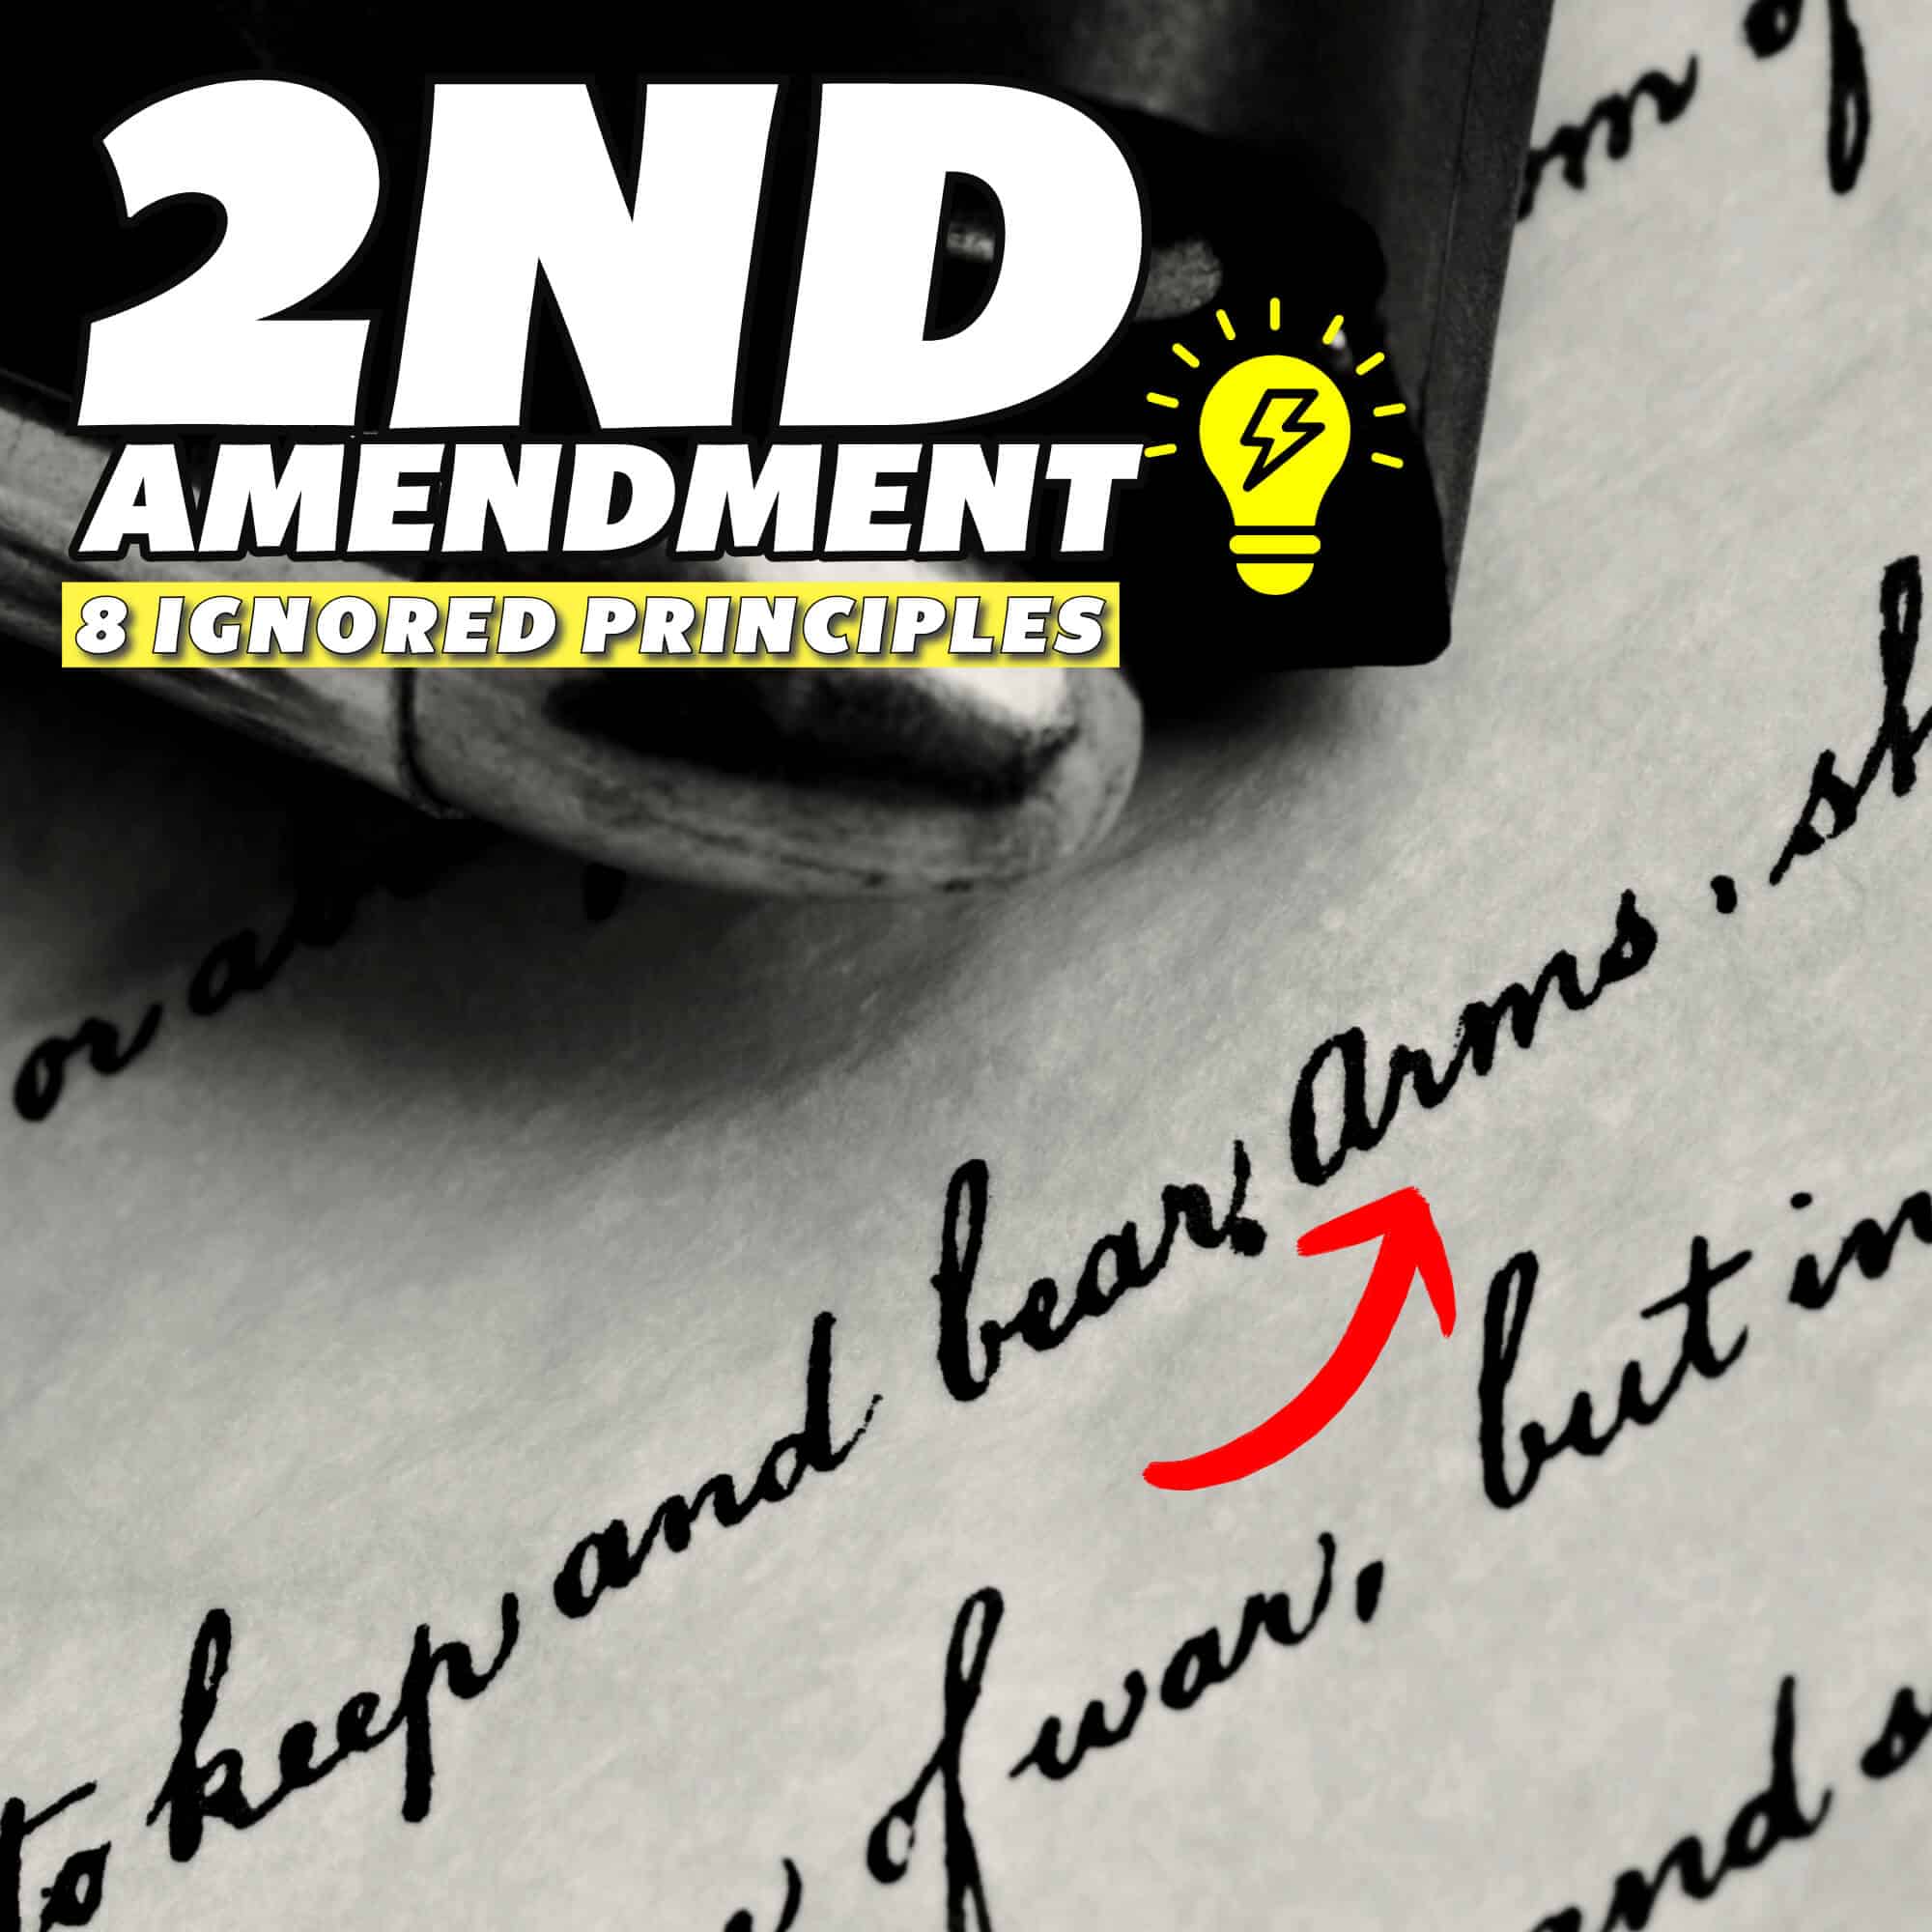 2nd Amendment: 8 Key Principles From the Founders Ignored Today